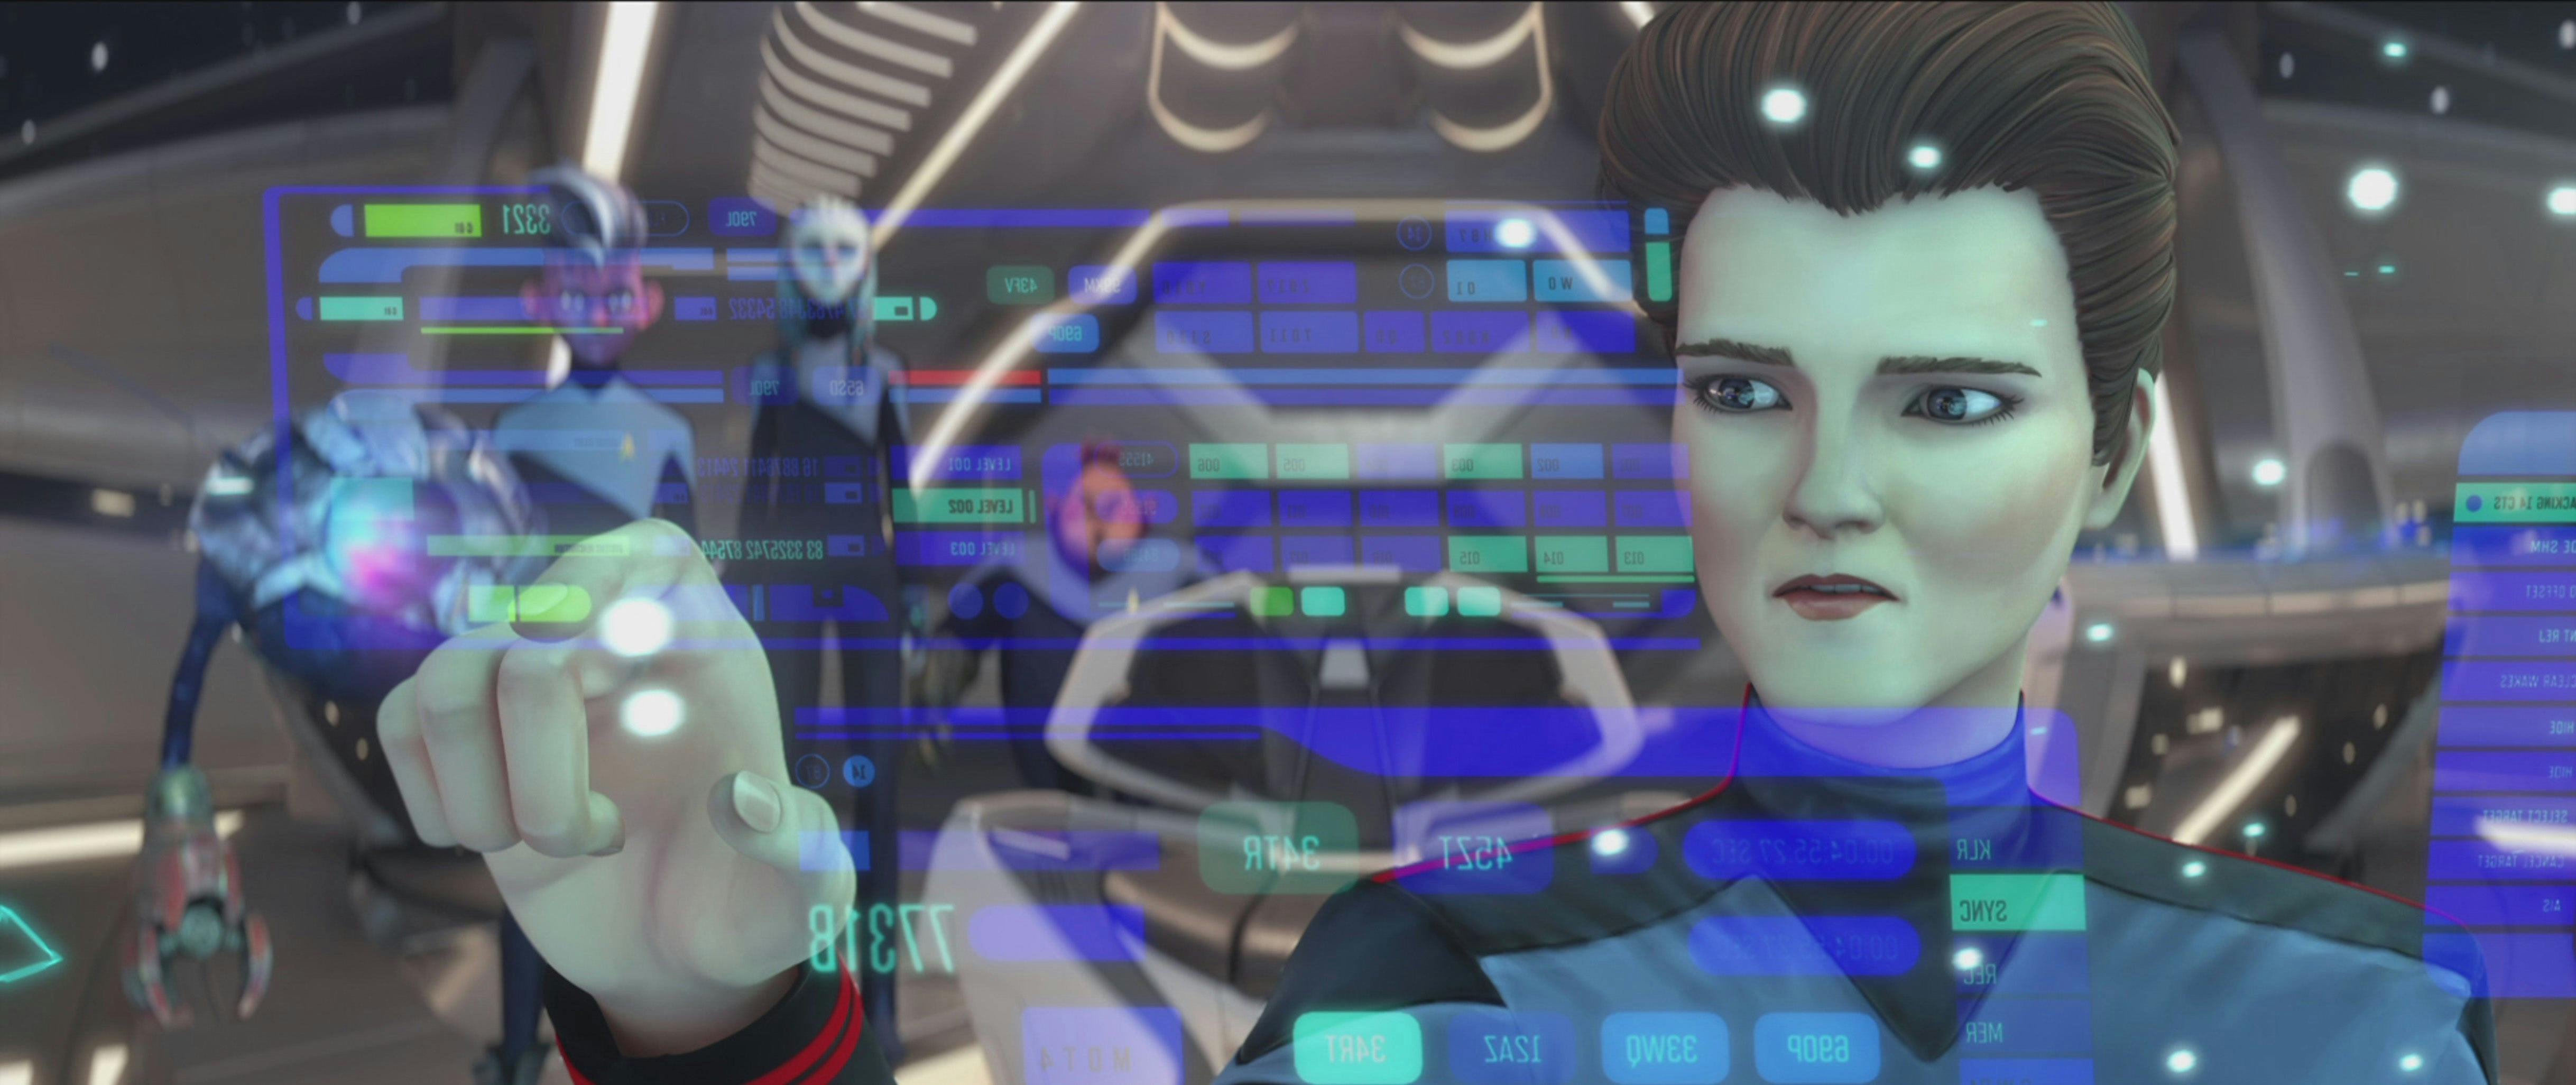 Holo-Janeway looks at a holo-screen while in the back, Zero, Dal, Gwyn, and Jankom Pog look over her shoulder on Star Trek: Prodigy